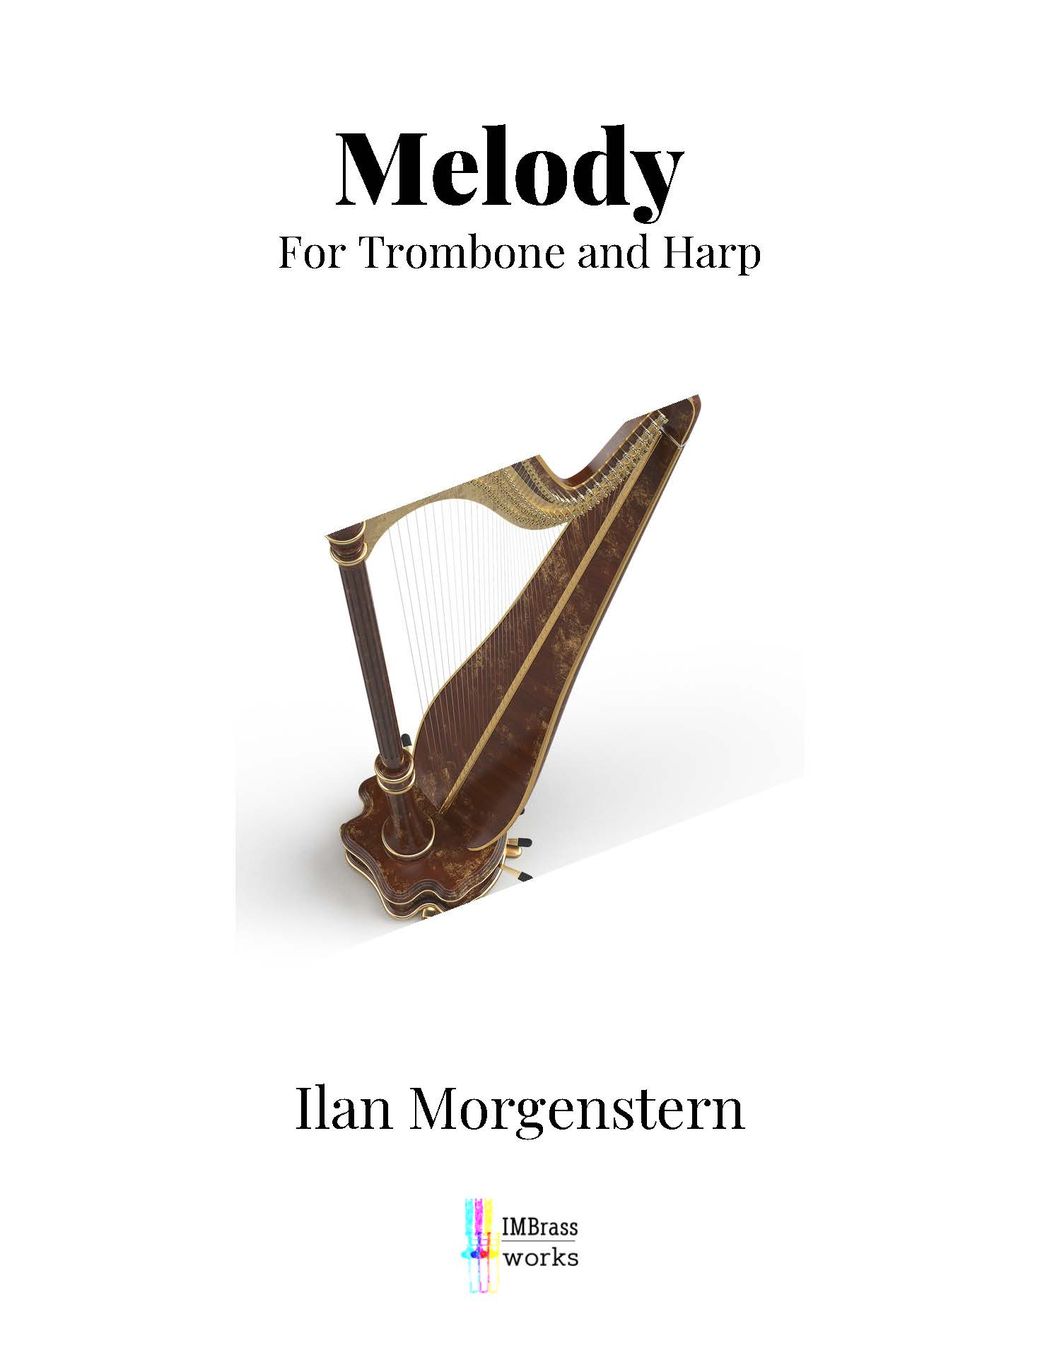 Ilan Morgenstern: Melody for Trombone and Harp